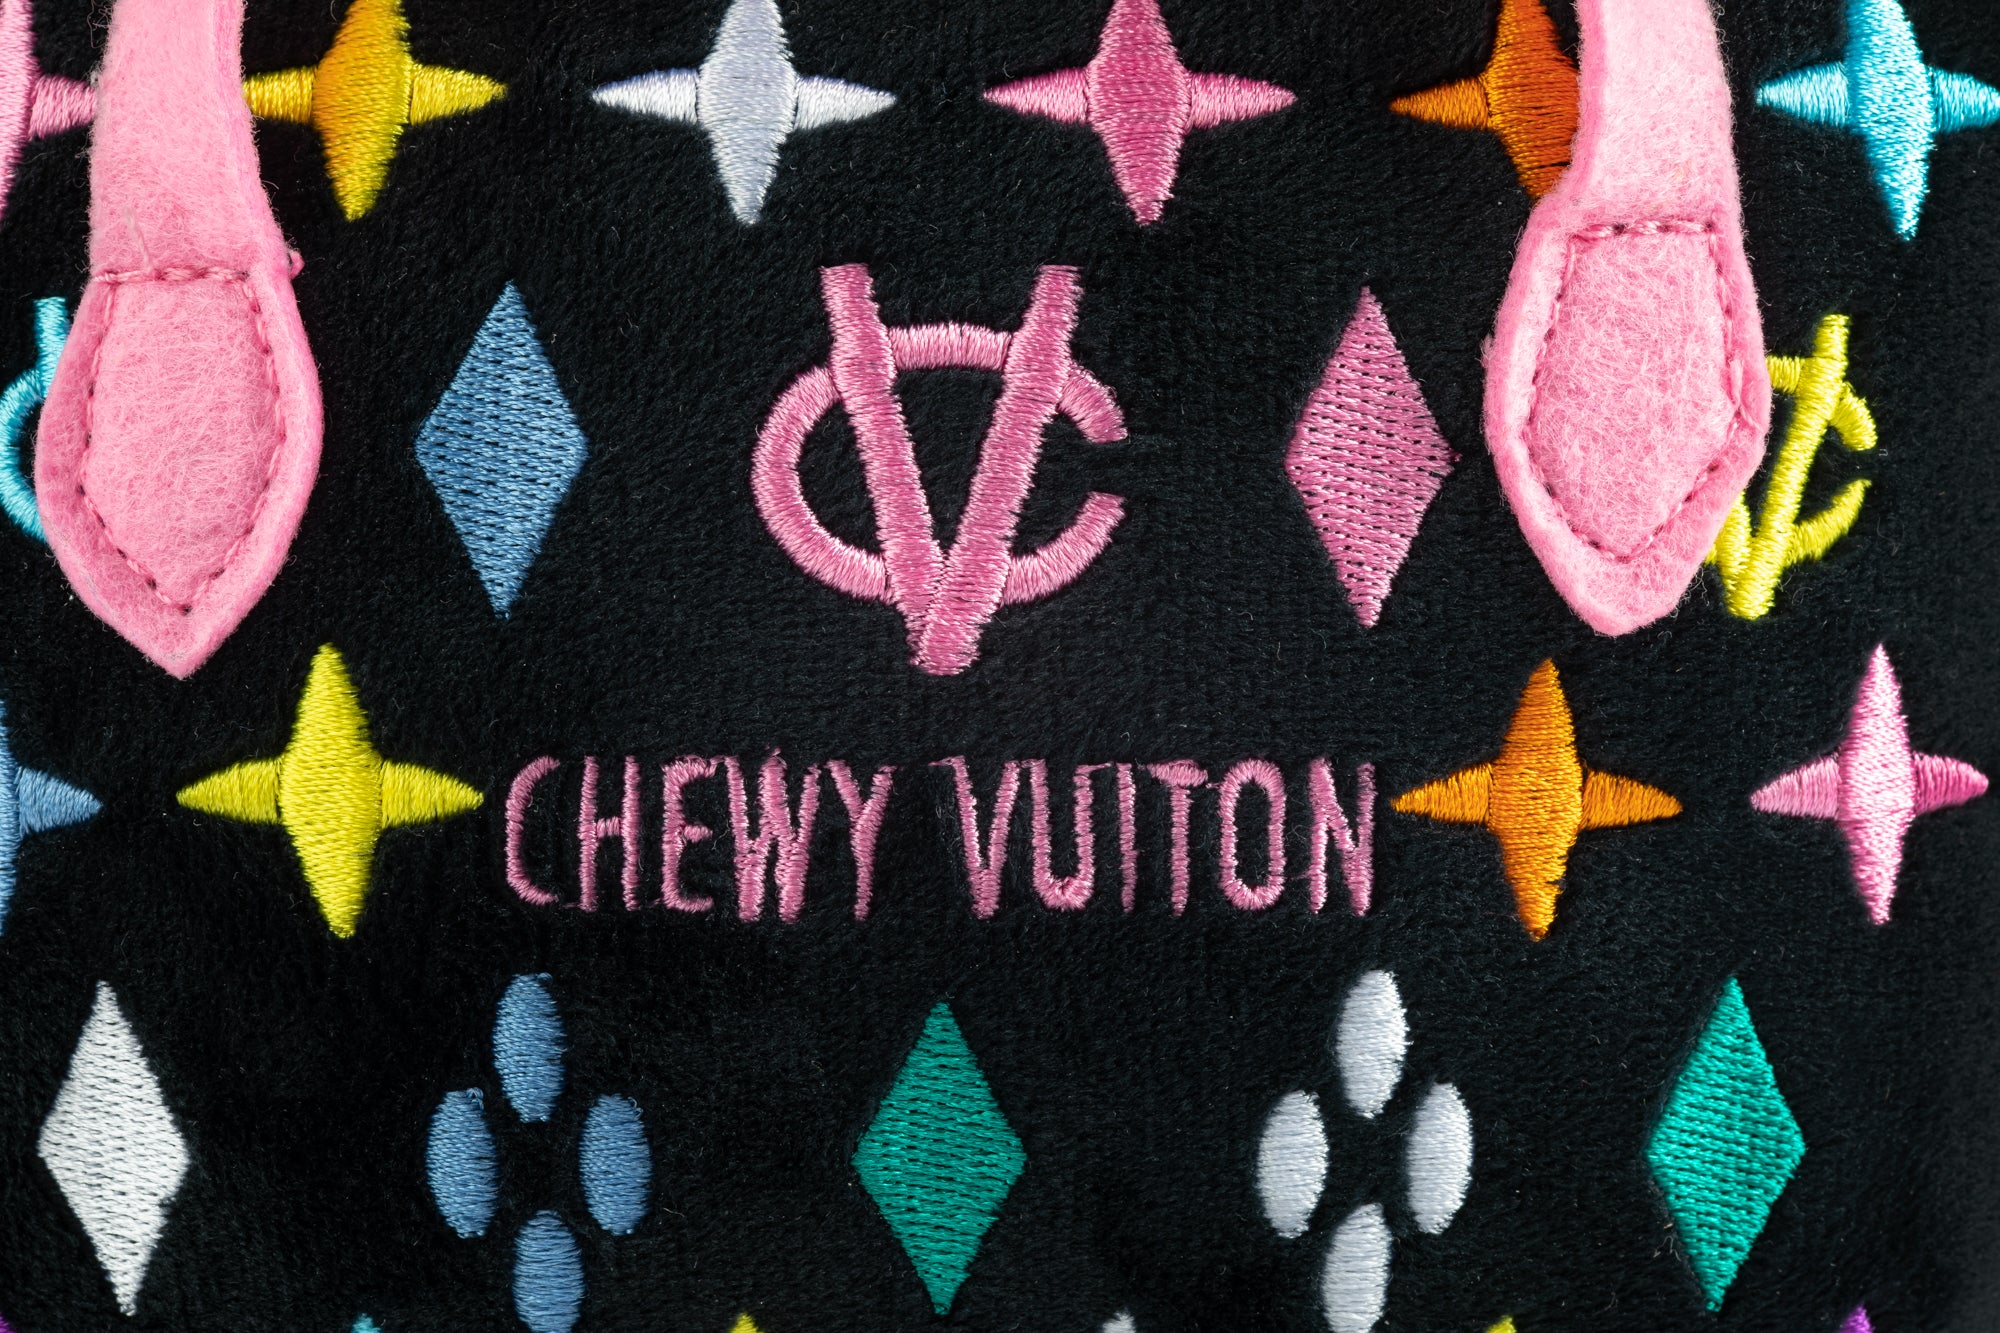 Chewy Vuiton Bag Squeaky Dog Toy in Black Monogram